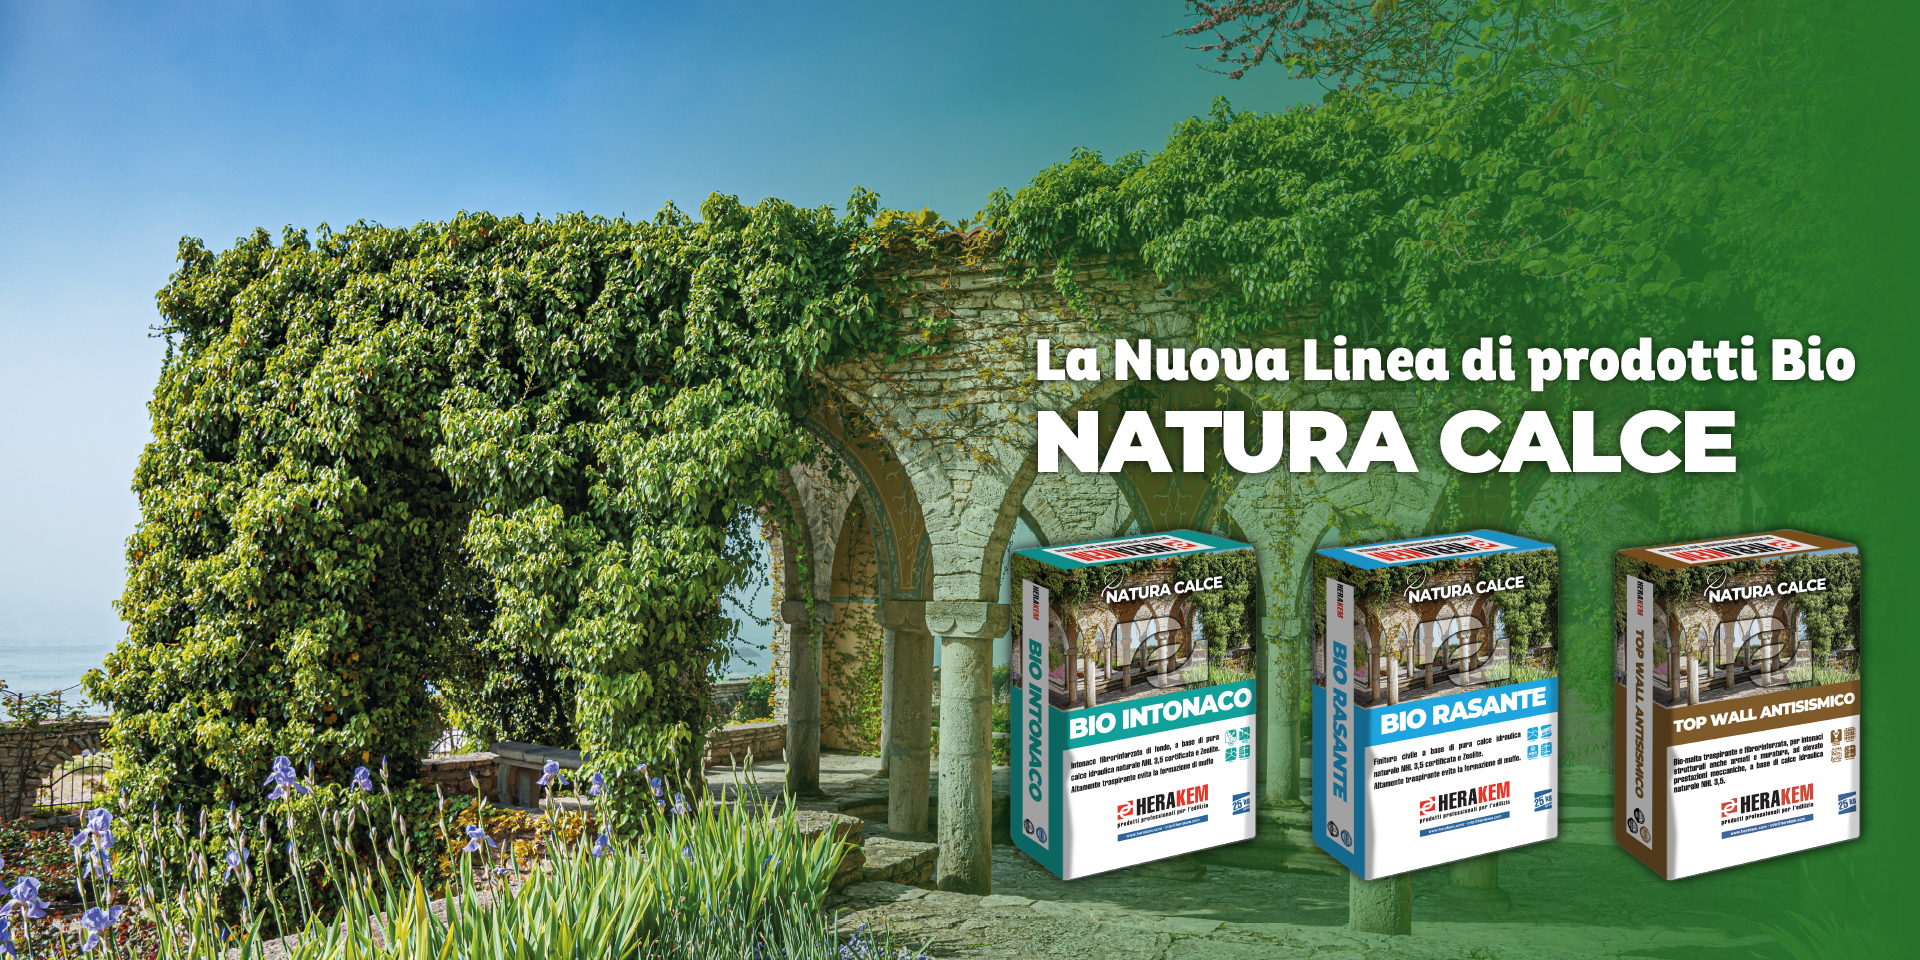 With NHL 3,5 Certified <br />Natural Hydraulic Lime